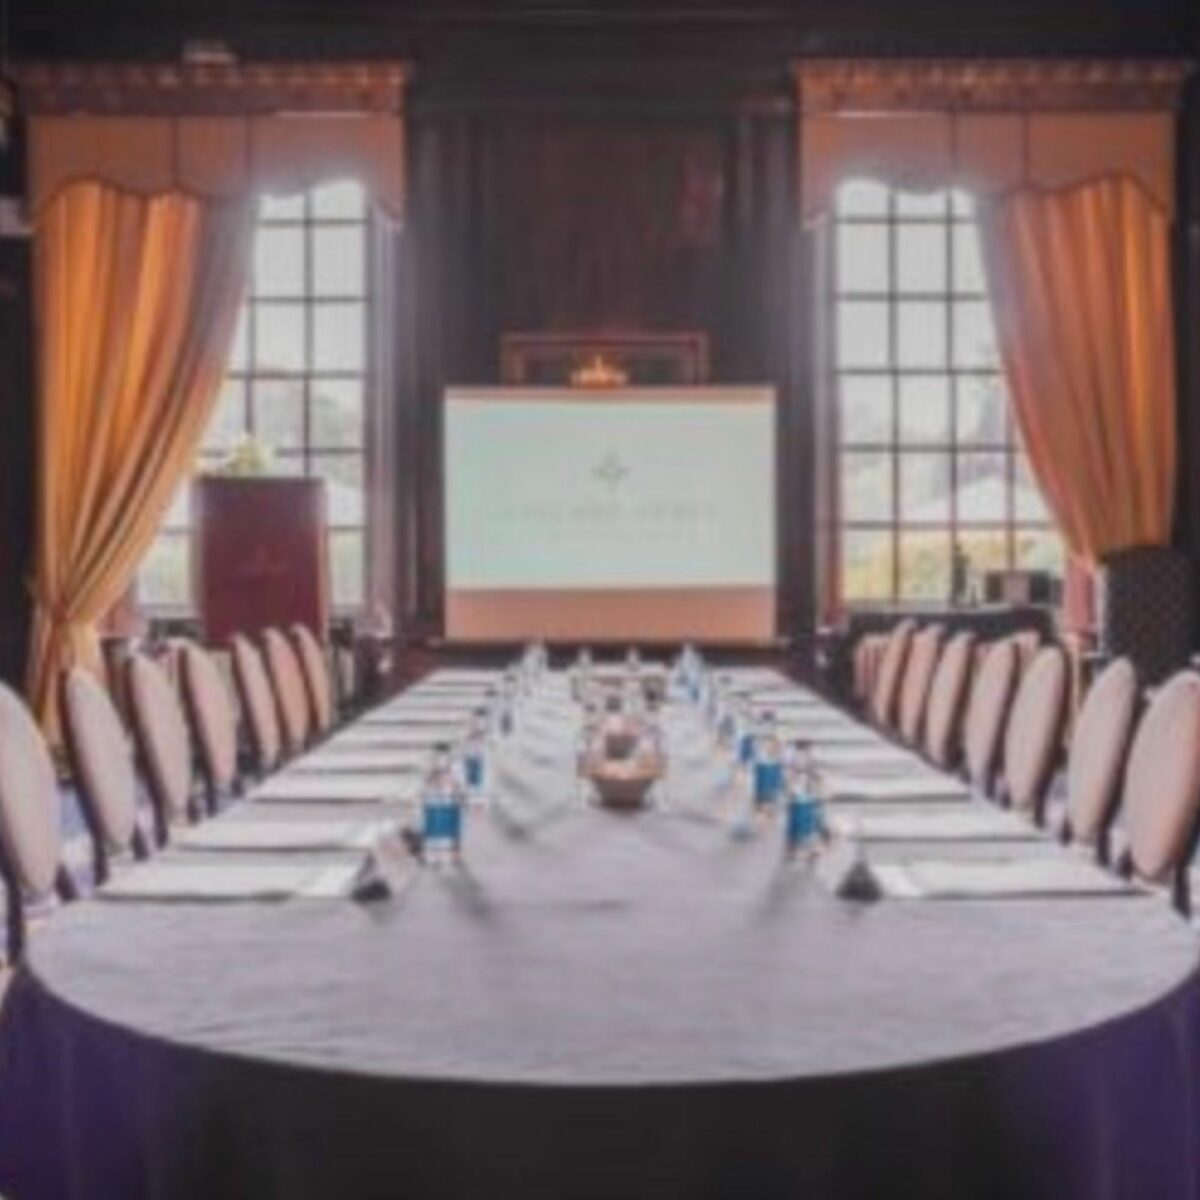 conference-rooms